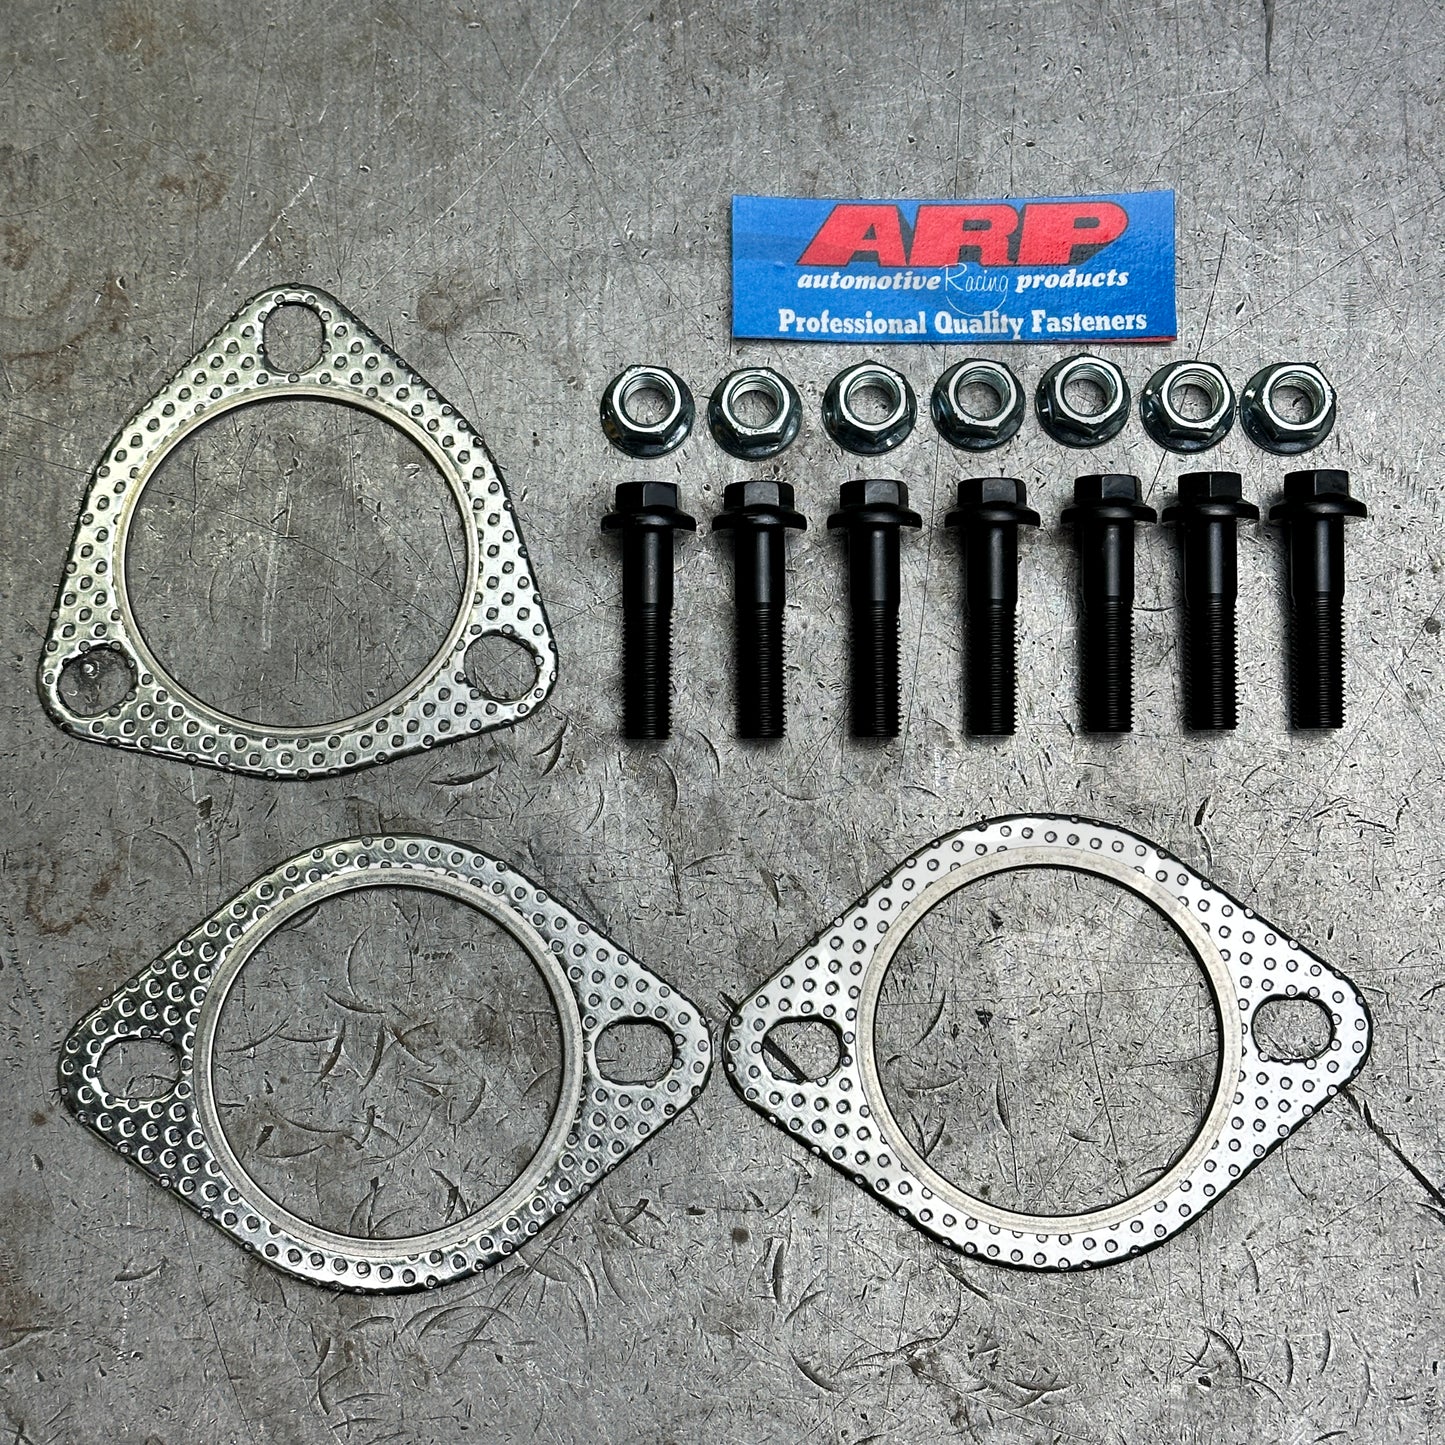 ARP Exhaust Gasket Hardware Kit (2.25 inch) For Honda Civic Acura Integra (Stainless Nuts)